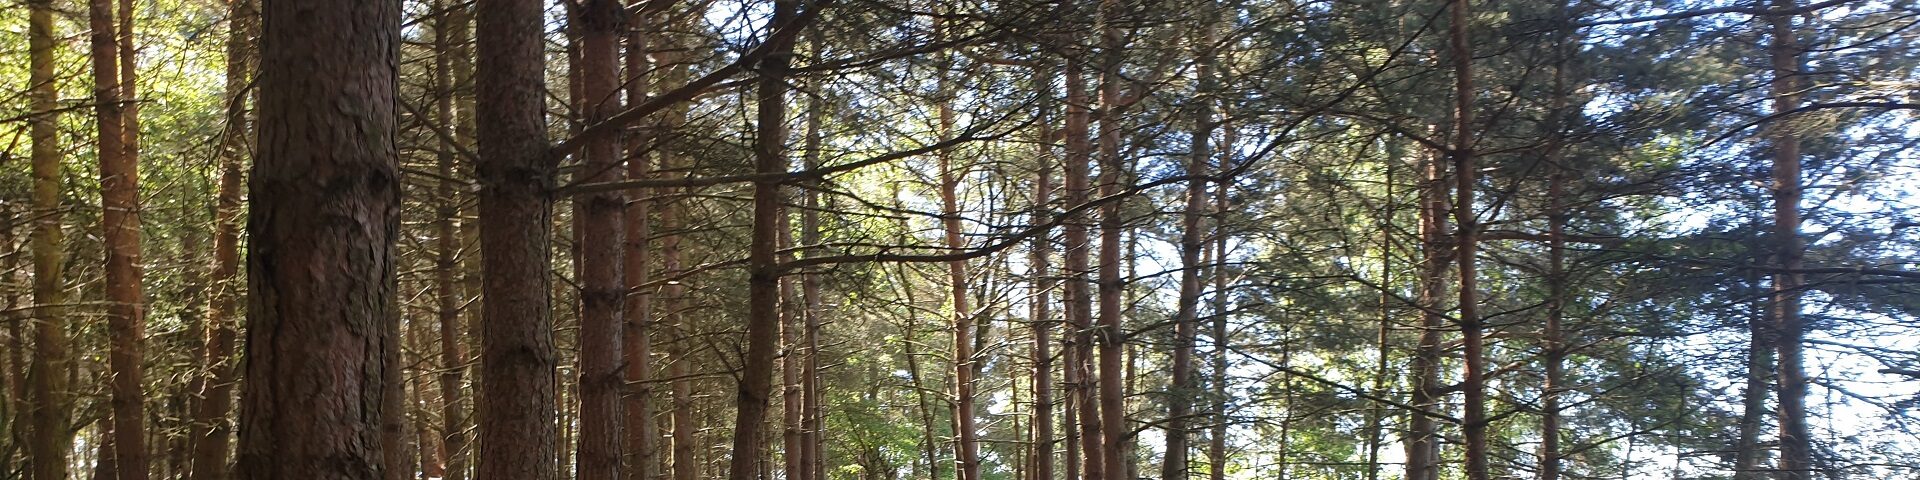 Cannock Chase trees